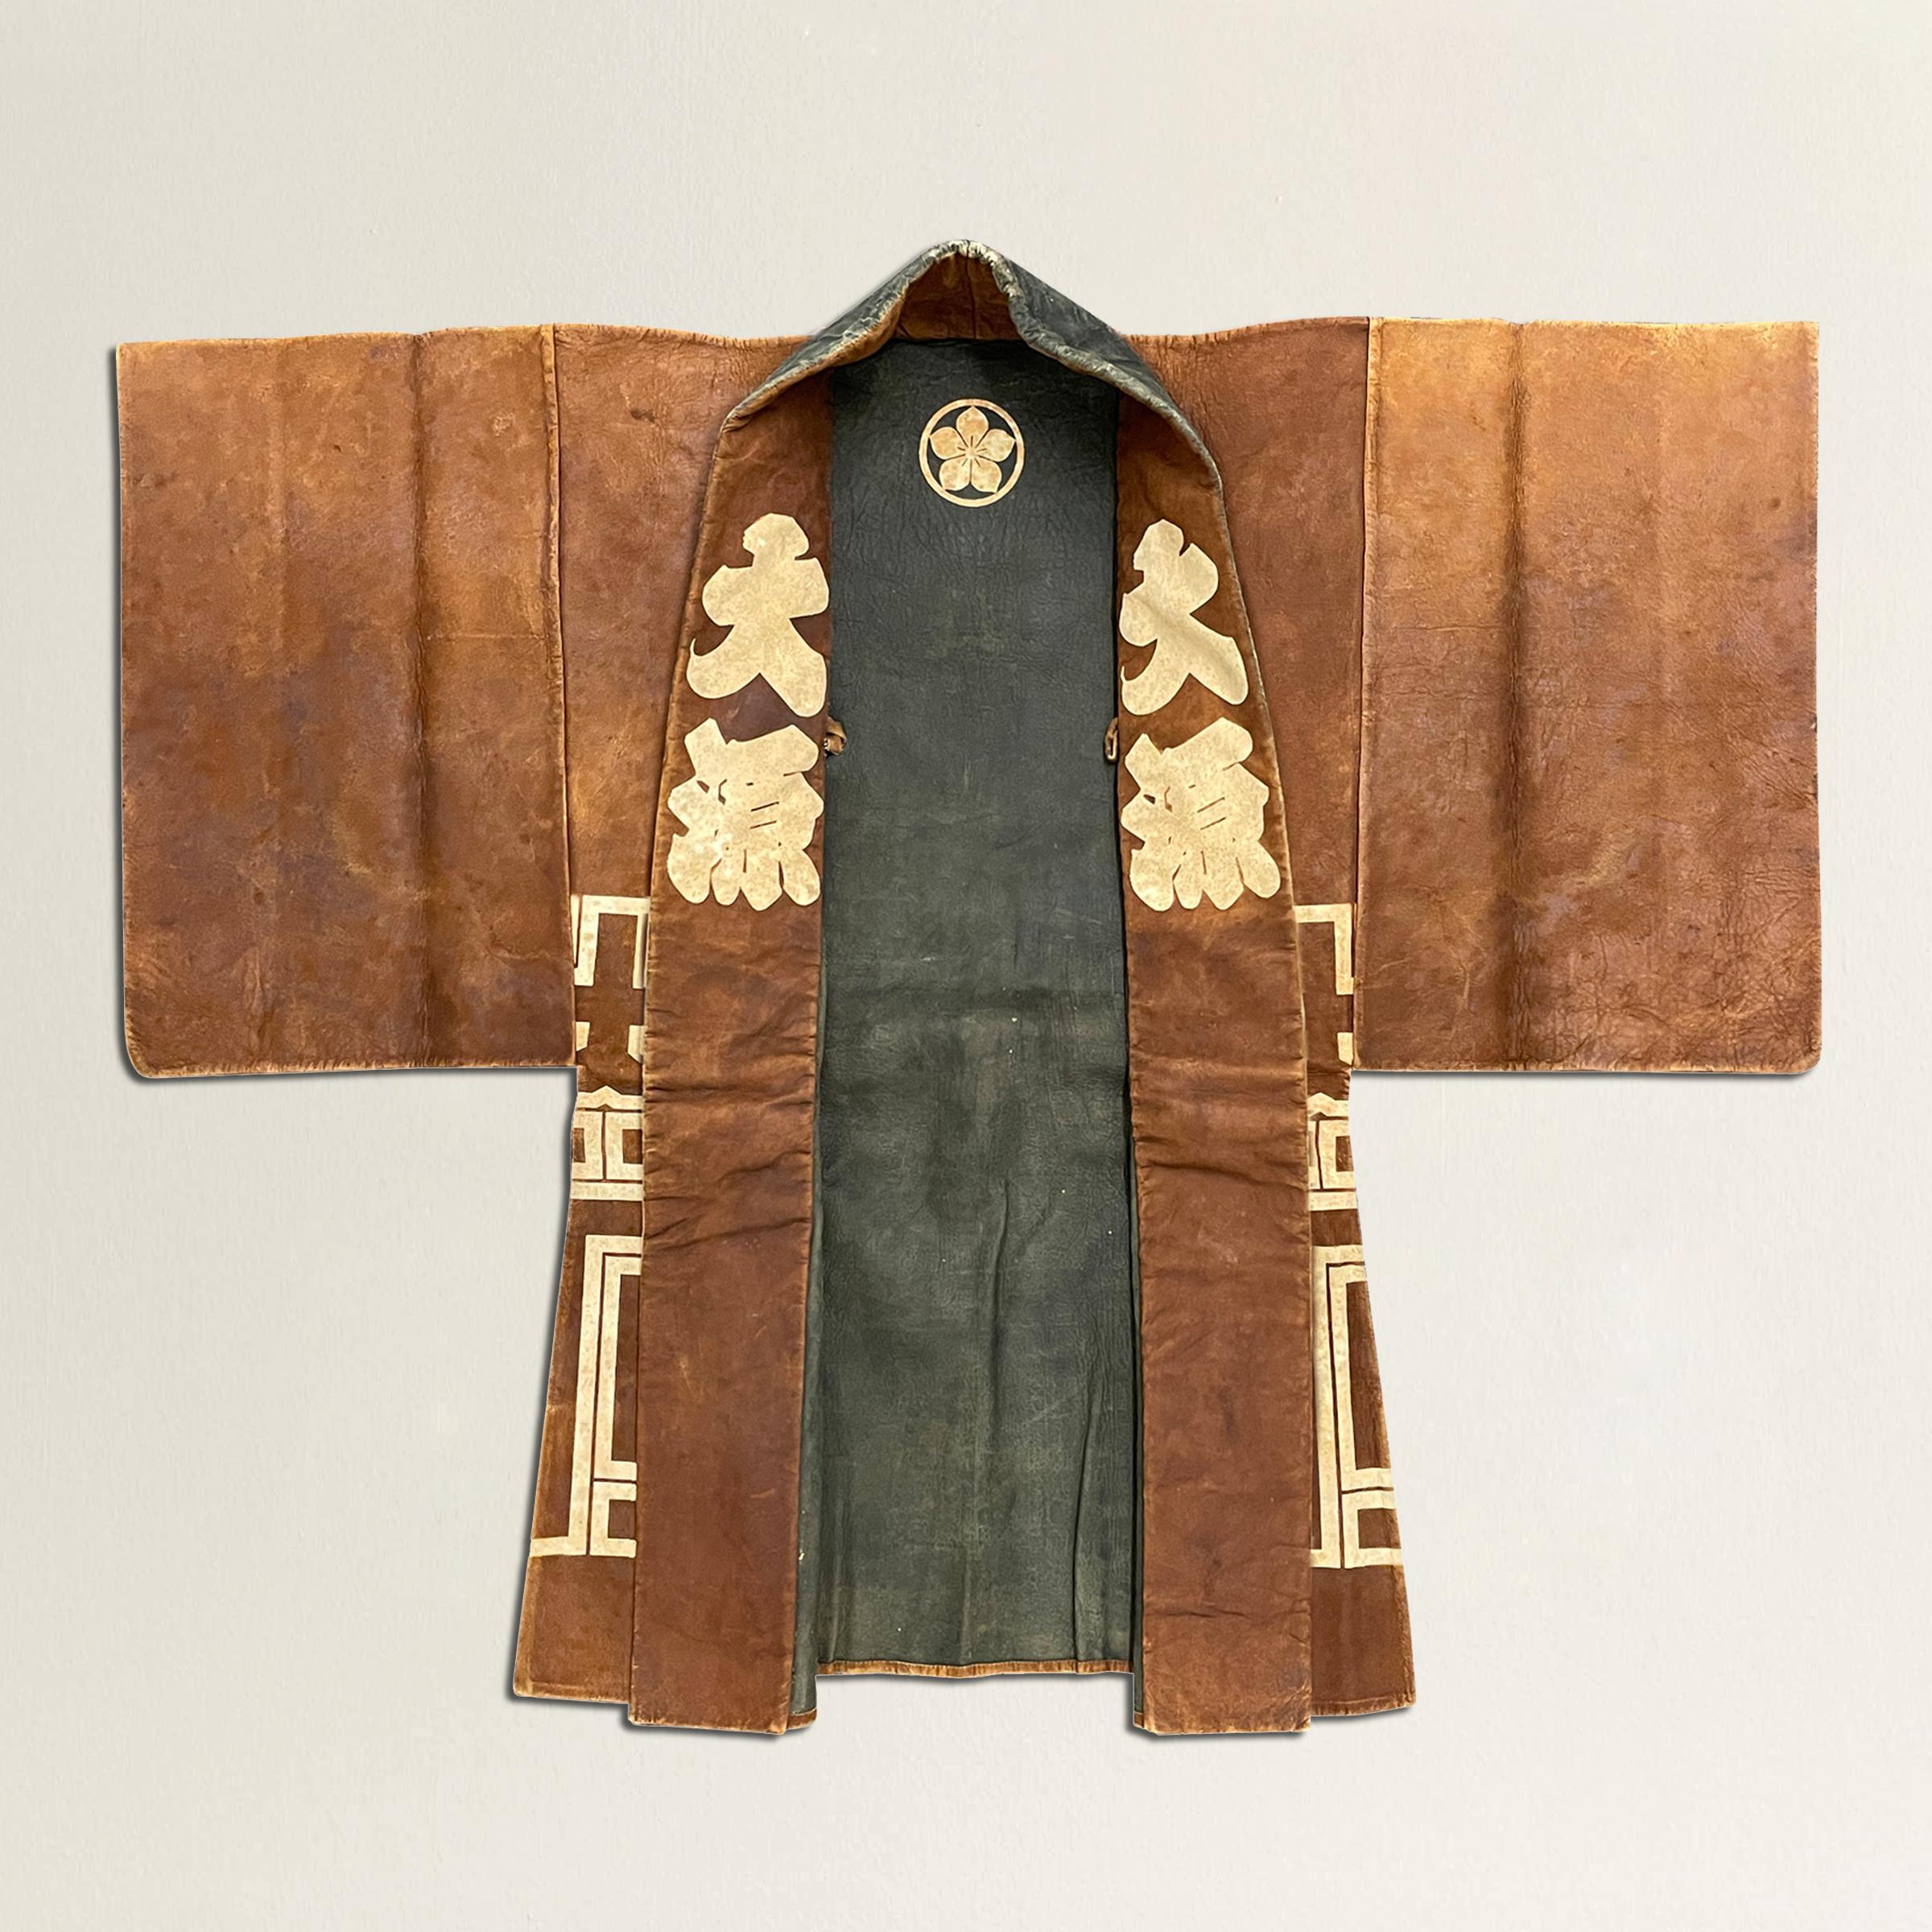 A rare 19th century Japanese firemen's coat, constructed from smoked deer leather and with bold white stenciled characters creating a wonderfully modern pattern across the back and bottom portion of the coat. The interior is black and white with